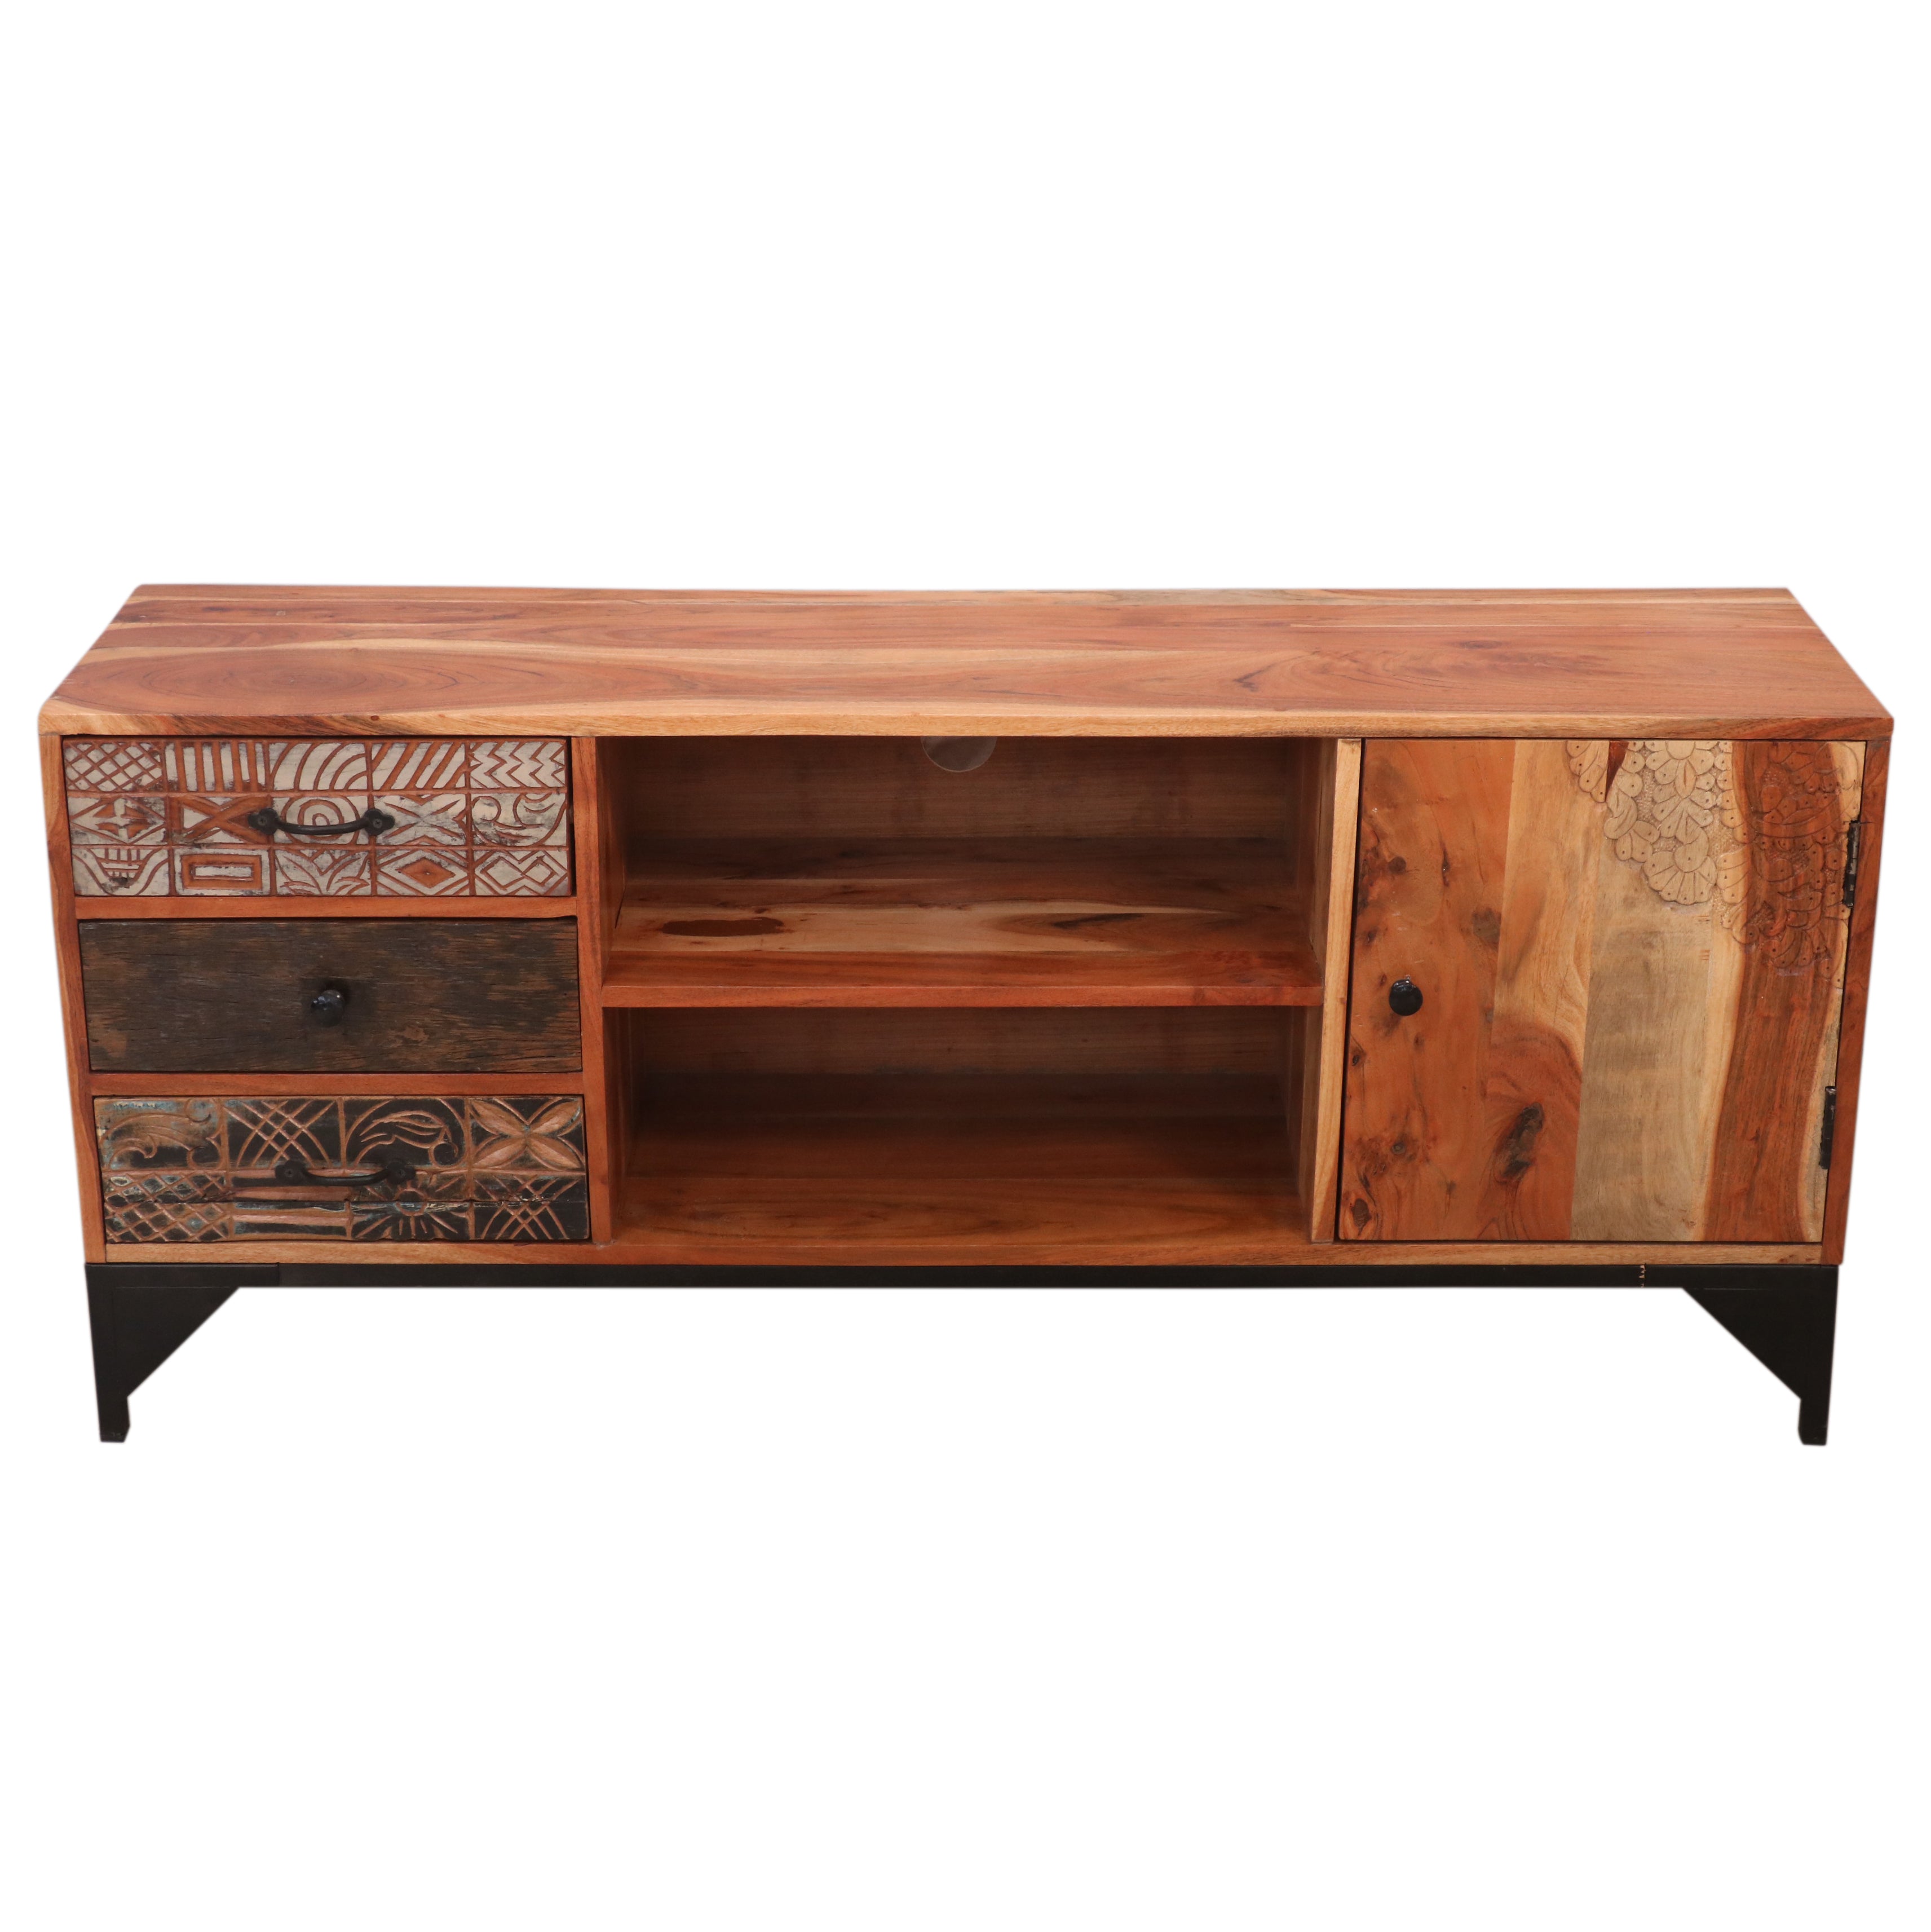 Antique Old Vintage Finish Multispace Wooden Handmade TV Stand Tv stand